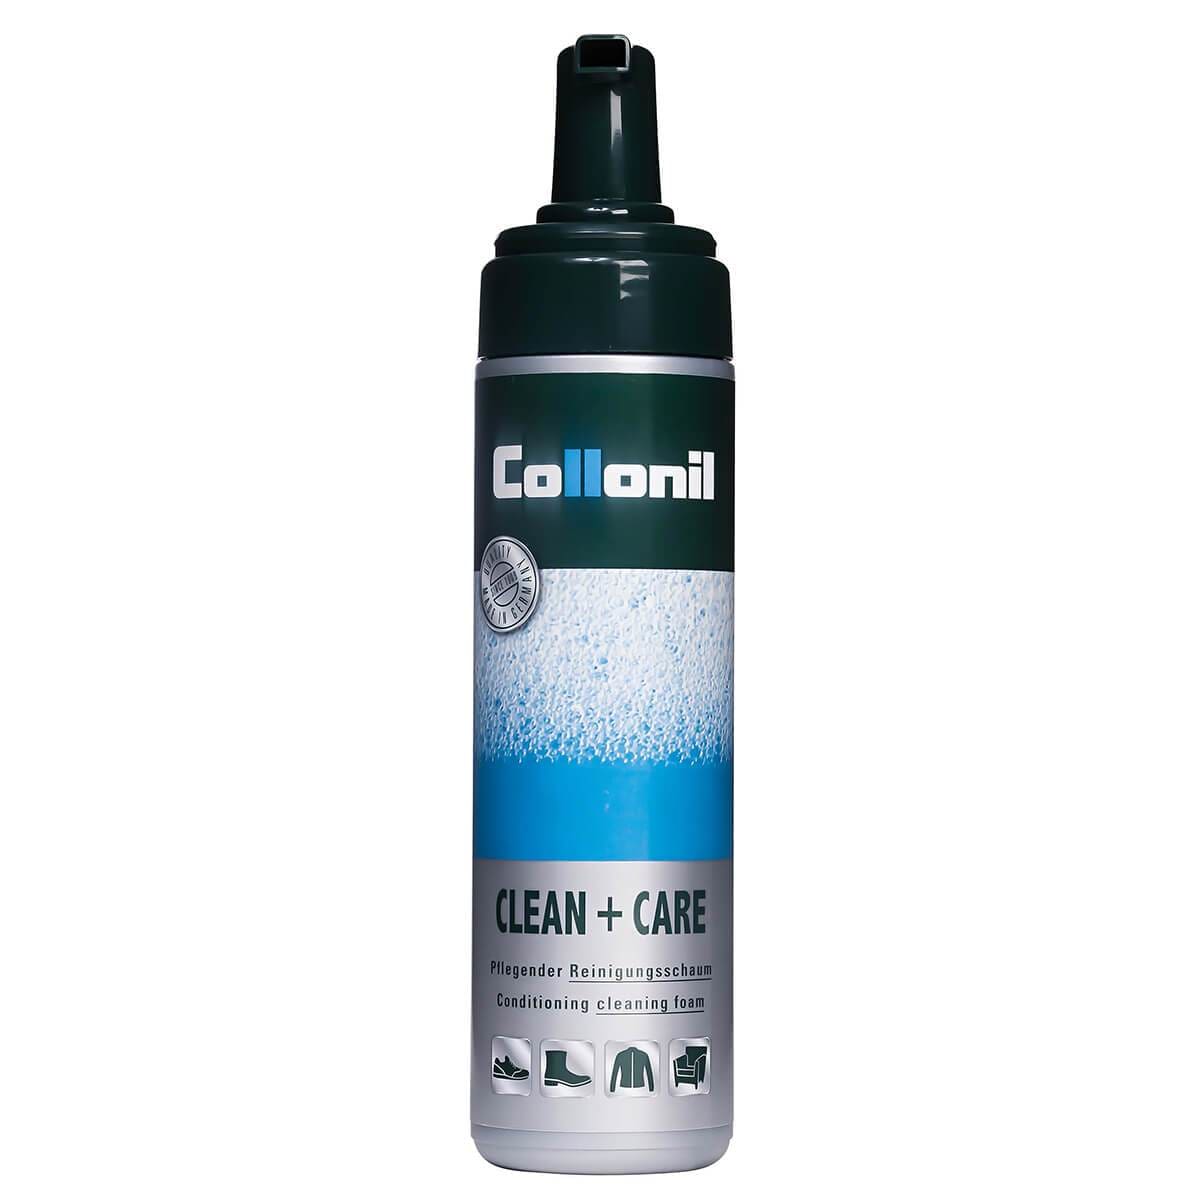 Clean + Care Classic - Underhåll